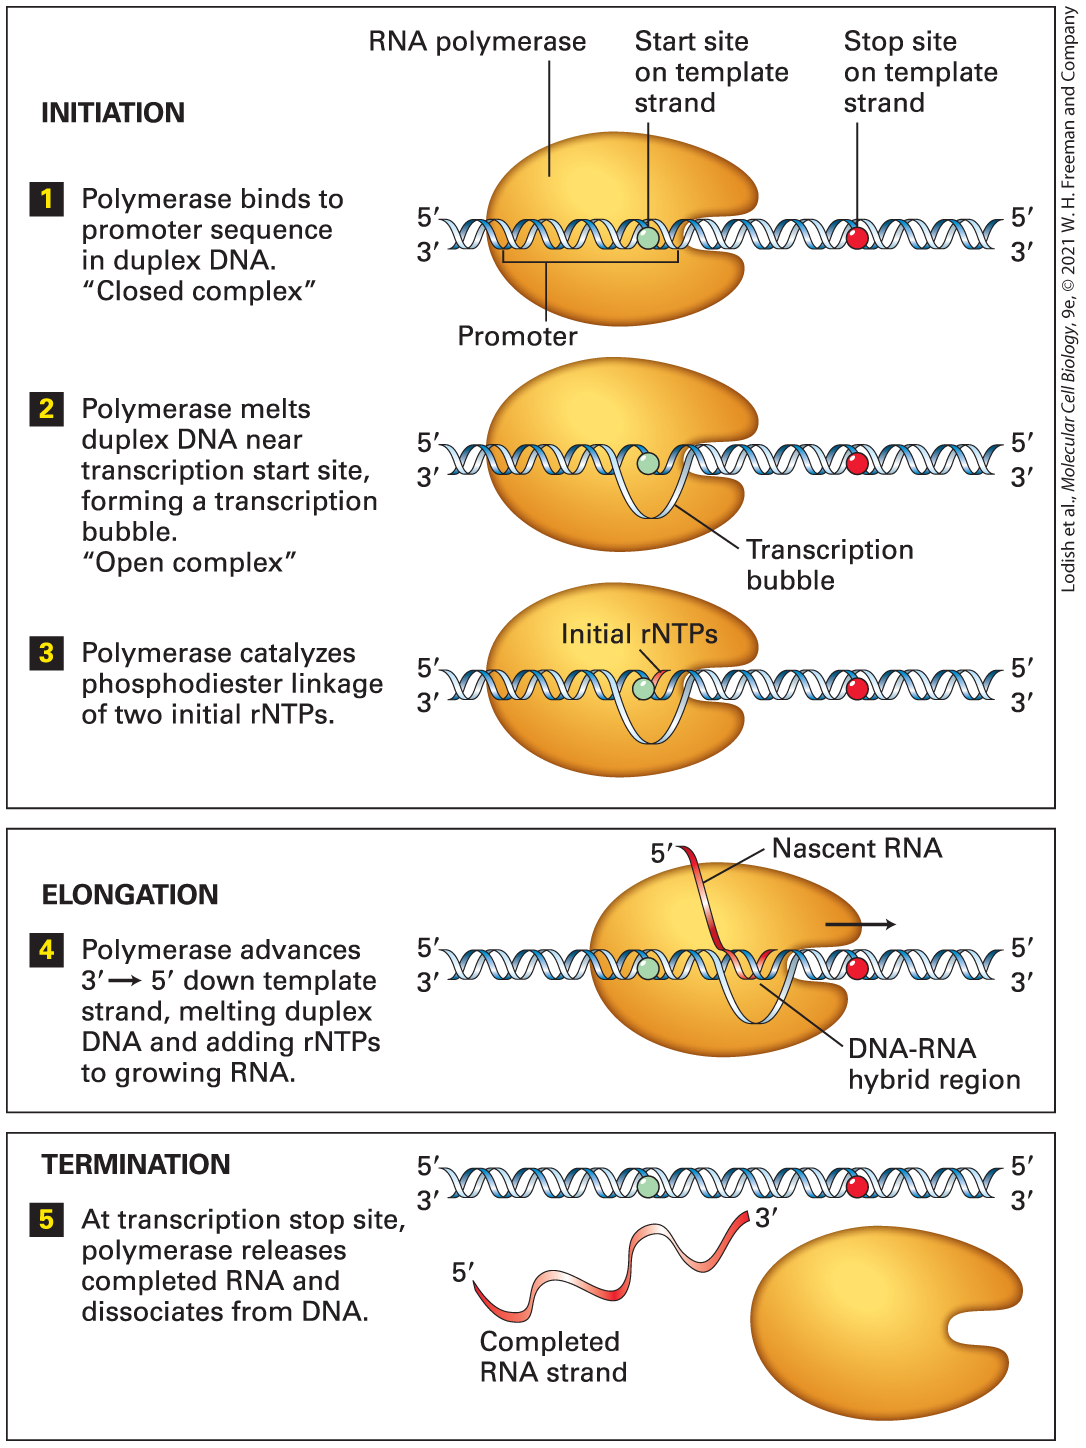 Stop site
on template
strand
RNA polymerase
Start site
on template
strand
INITIATION
1 Polymerase binds to
promoter sequence
in duplex DNA.
"Closed complex"
3'
Promoter
2 Polymerase melts
duplex DNA near
transcription start site,
forming a transcription
bubble.
5-
3'
Transcription
bubble
"Open complex"
Initial rNTPs
3 Polymerase catalyzes
5-
phosphodiester linkage
3'
5'
3'
of two initial rNTPs.
5'
Nascent RNA
ELONGATION
4 Polymerase advances
5'
3-5' down template MamNMn
3'
strand, melting duplex
DNA and adding rNTPs
to growing RNA.
DNA-RNA
hybrid region
TERMINATION
5'
5'
MMの
3'
5 At transcription stop site,
polymerase releases
completed RNA and
dissociates from DNA.
3'
5'
Completed
RNA strand
Lodish et al., Molecular Cell Biology, 9e, © 2021 W. H. Freeman and Company
